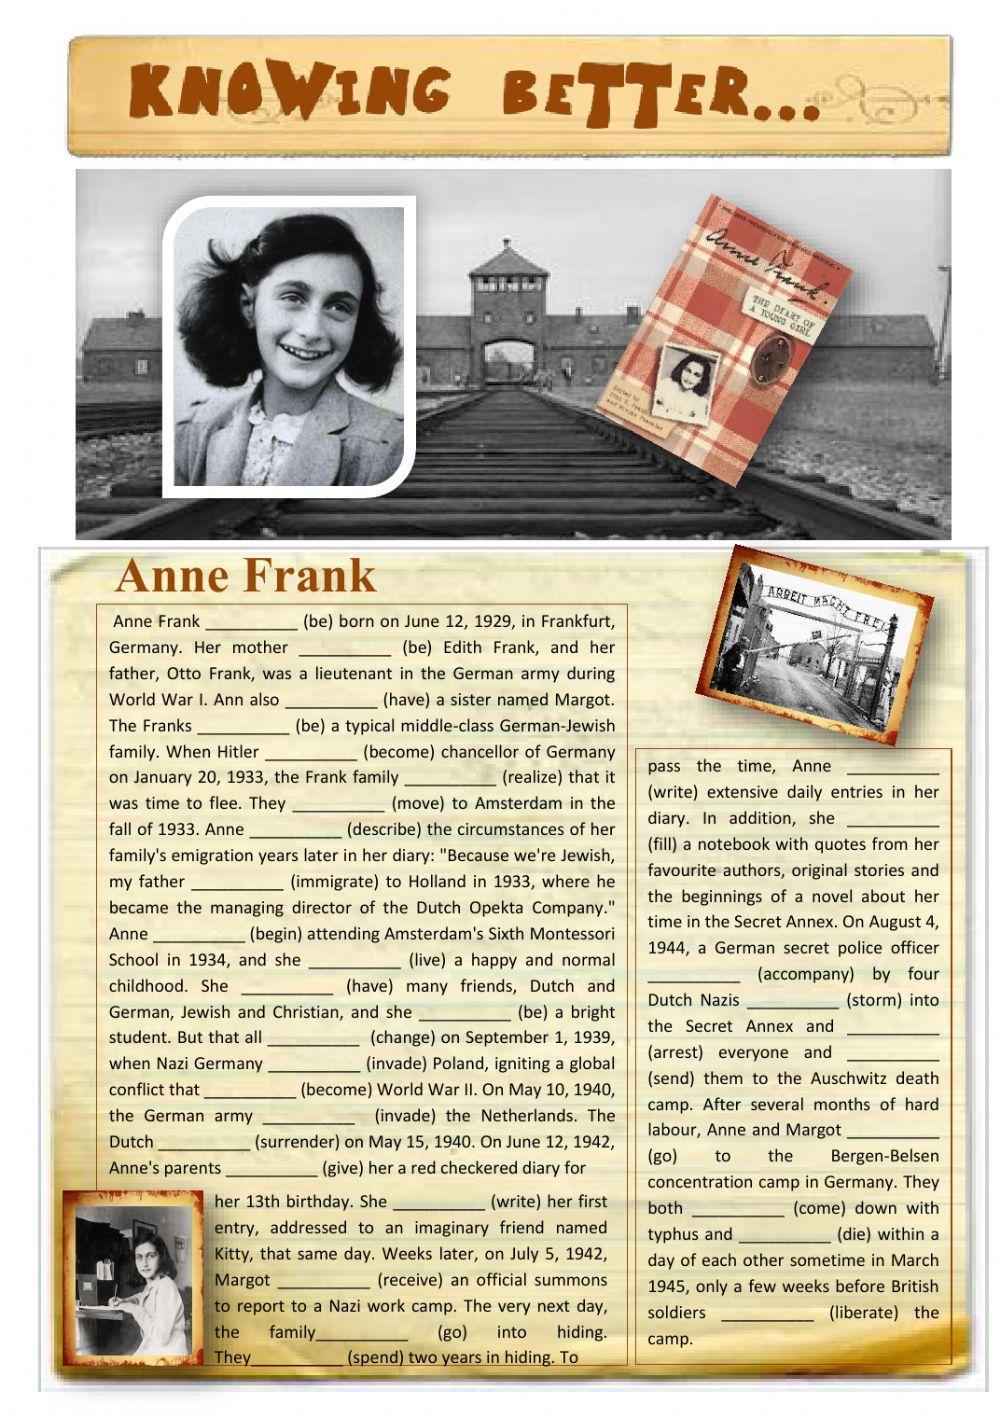 Knowing Better...Anne Frank